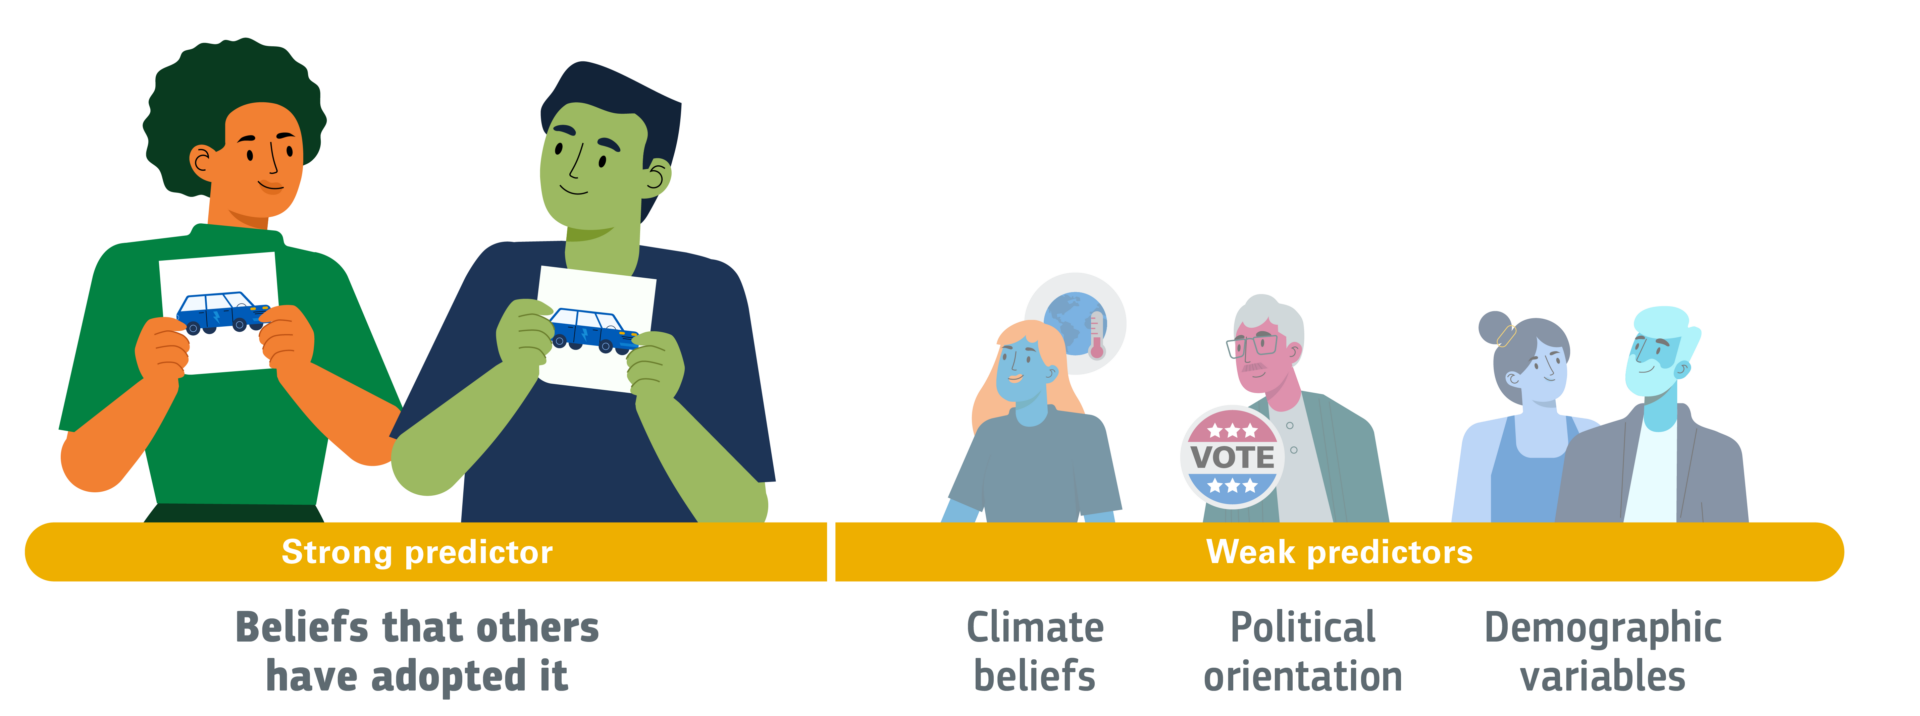 Illustration depicting peer behavior as a stronger predictor than climate beliefs, politics, and demographics.